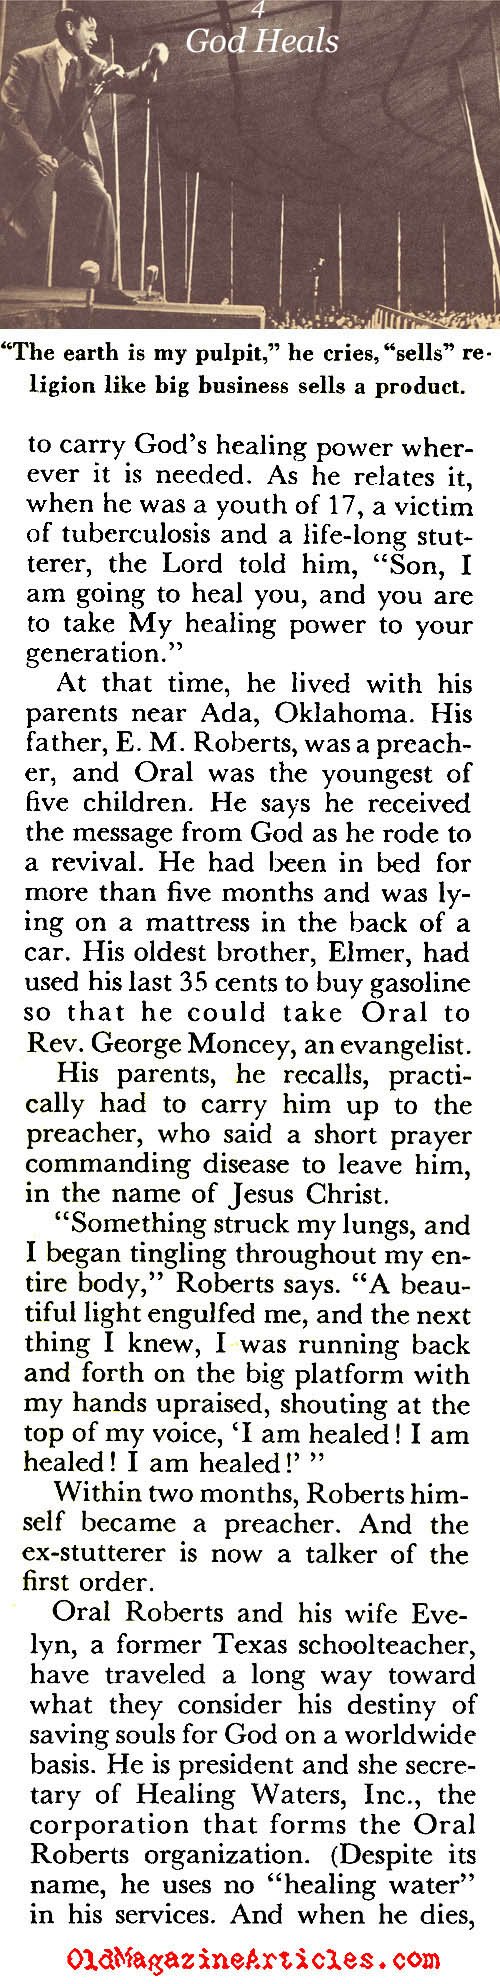 The Rise of Oral Roberts  (Coronet Magazine, 1955)